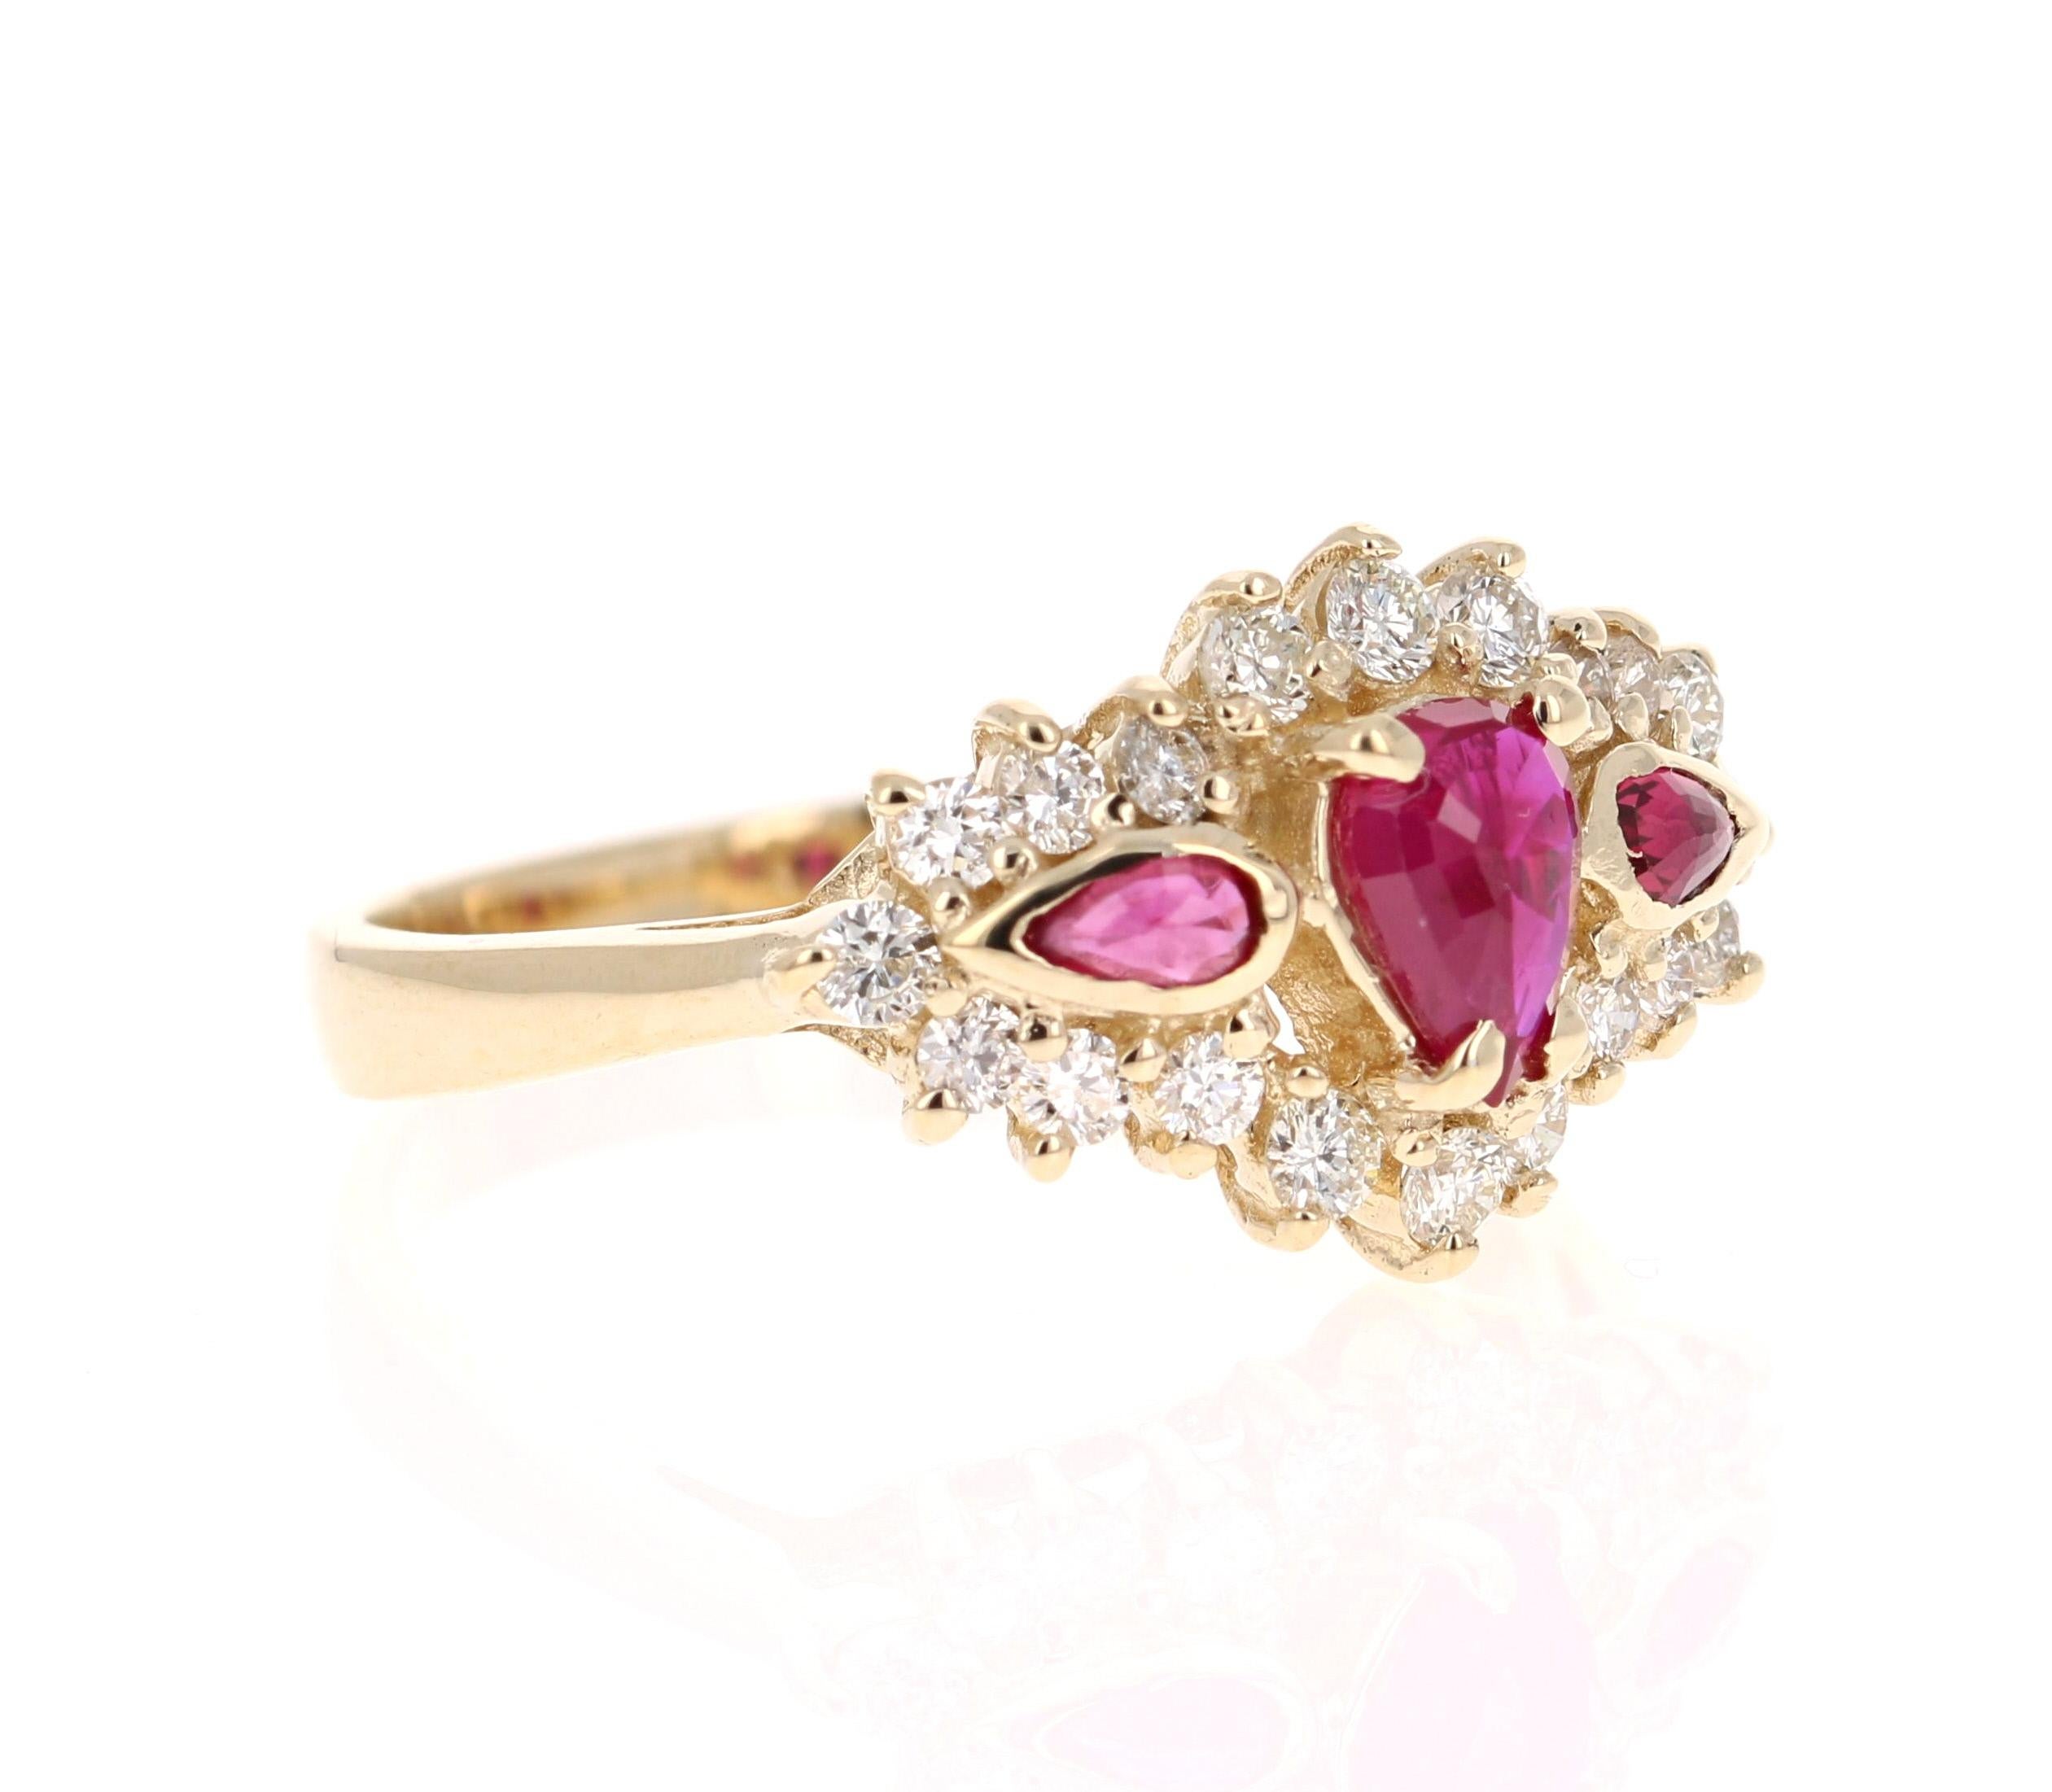 Simply beautiful Ruby Diamond Ring with 3 Pear Cut Burmese Rubies that weigh 0.63 Carats.  There are 20 Round Cut Diamonds that weigh 0.48 Carats. The total carat weight of the ring is 1.10 Carats. The clarity and color of the diamonds are VS2-H.